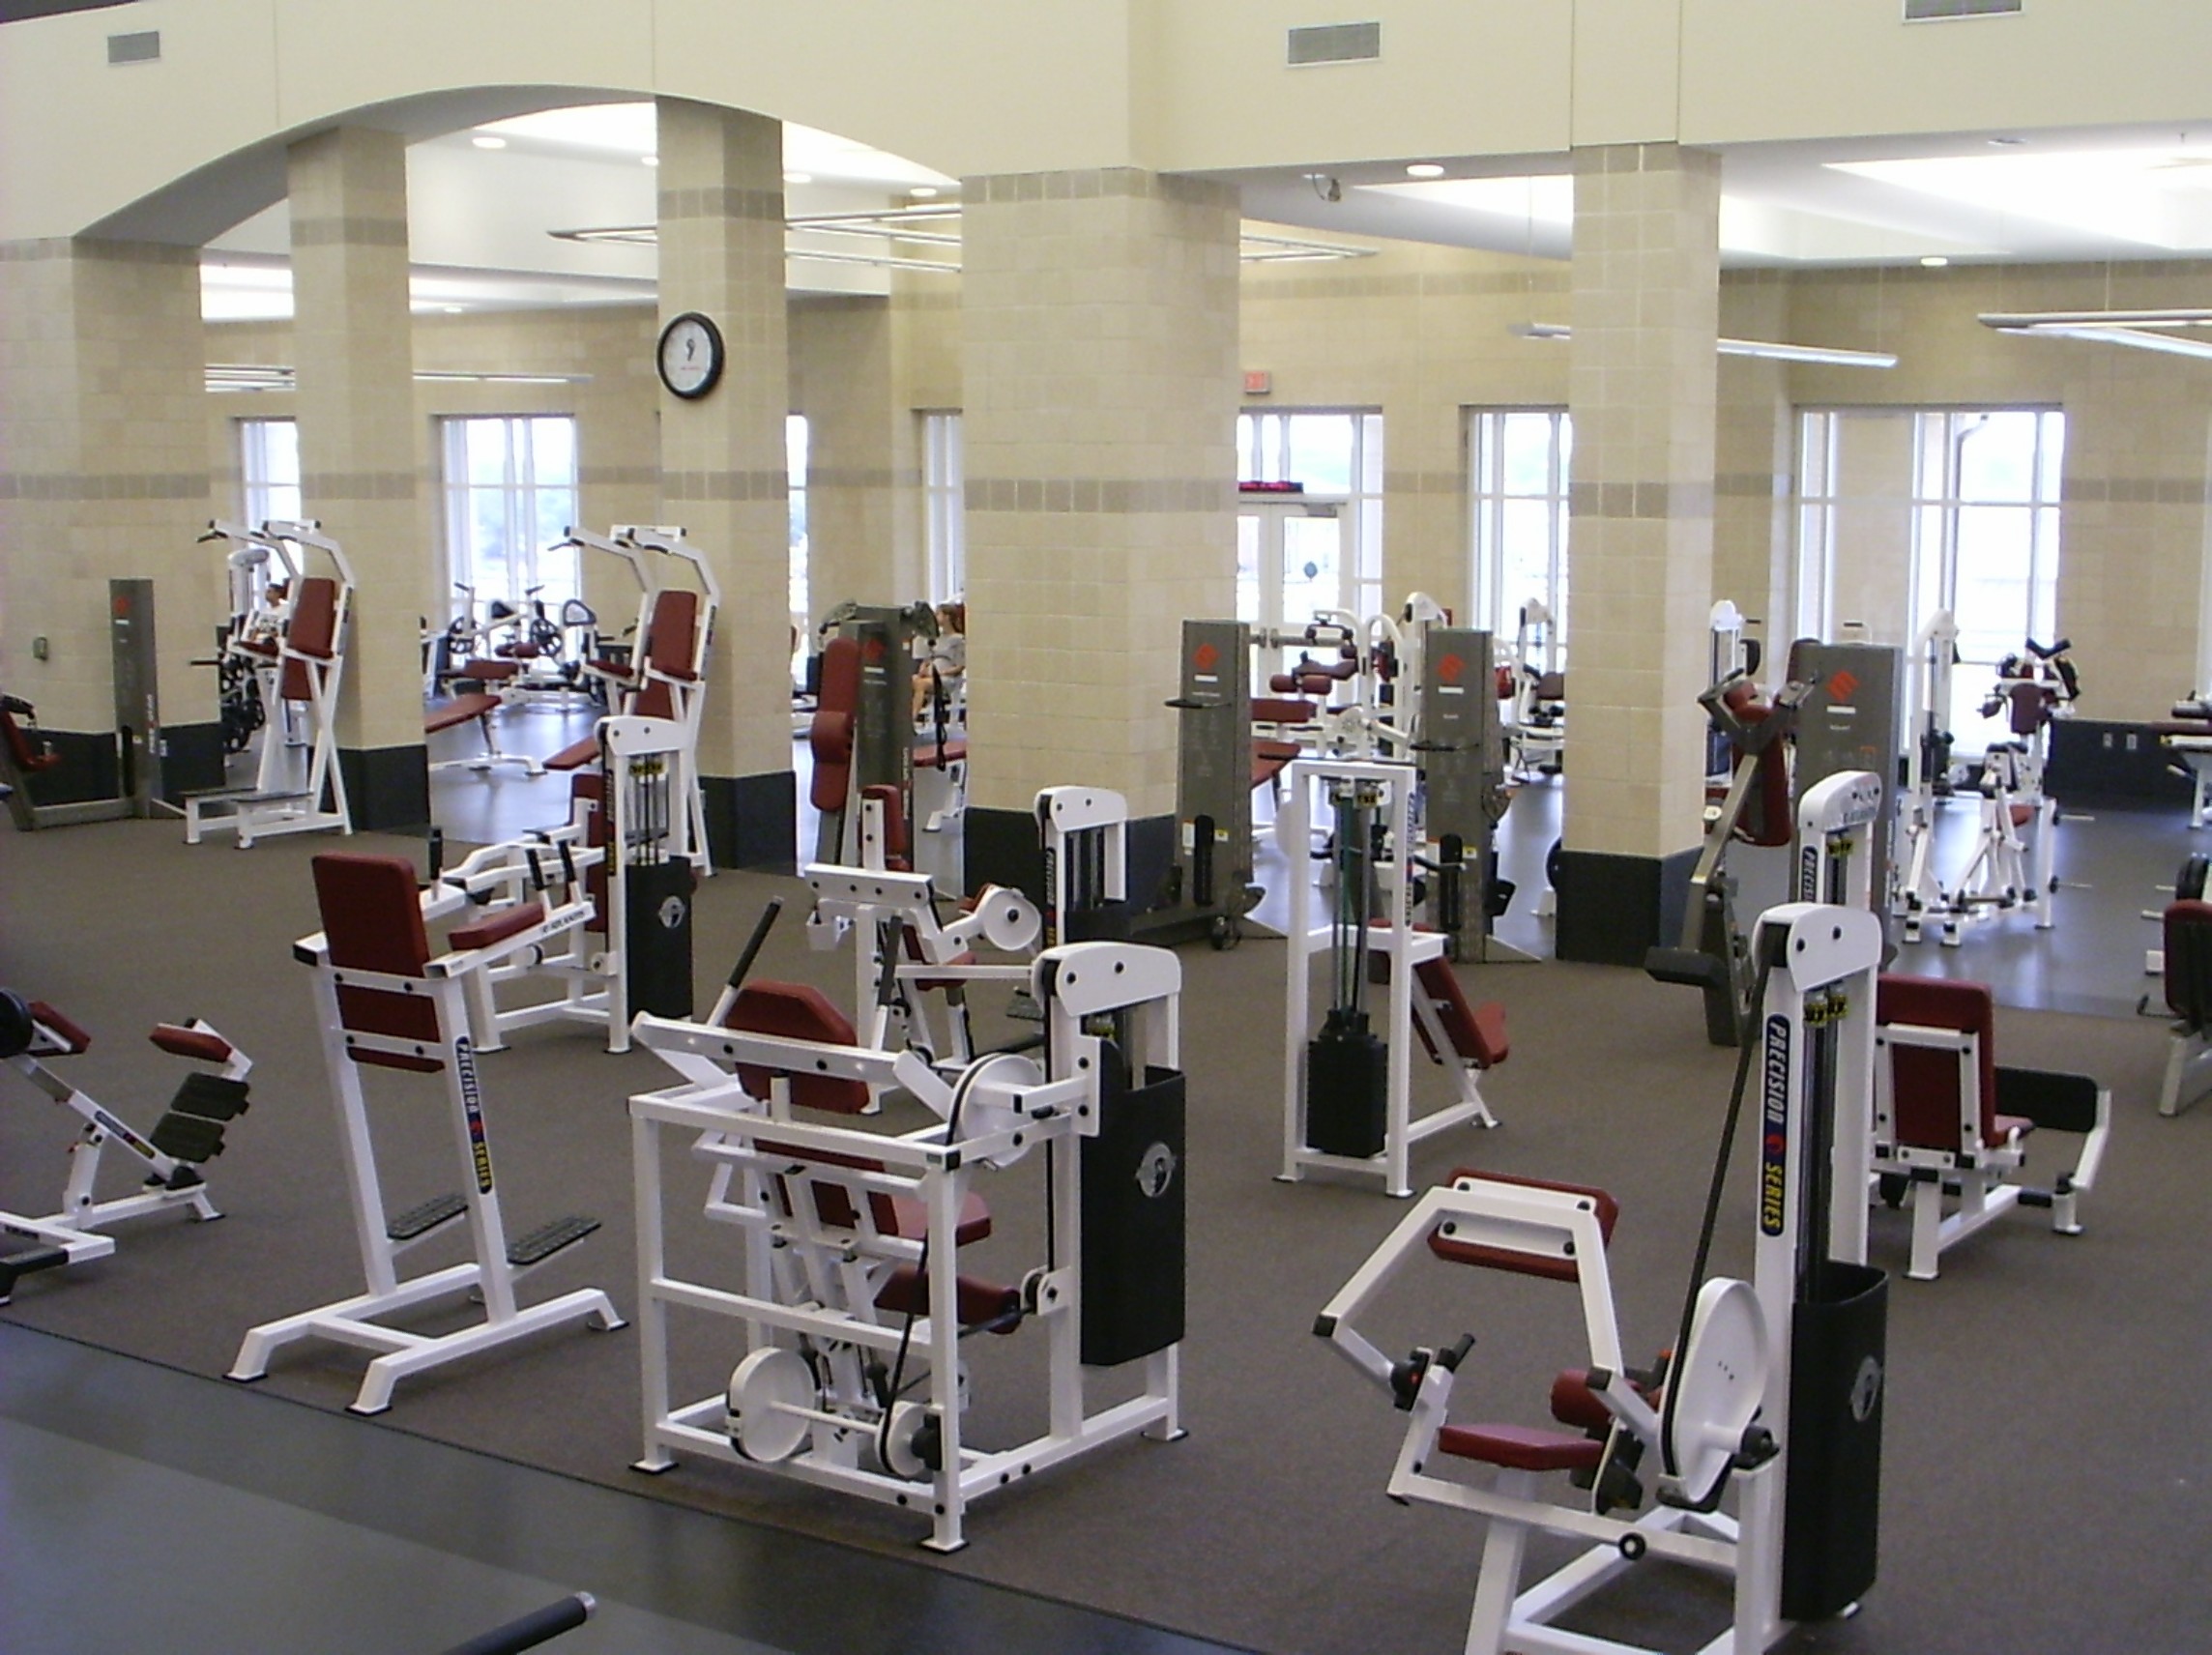 A fitness center with strength training equipment arranged in rows with significant space between each piece of equipment and each row.